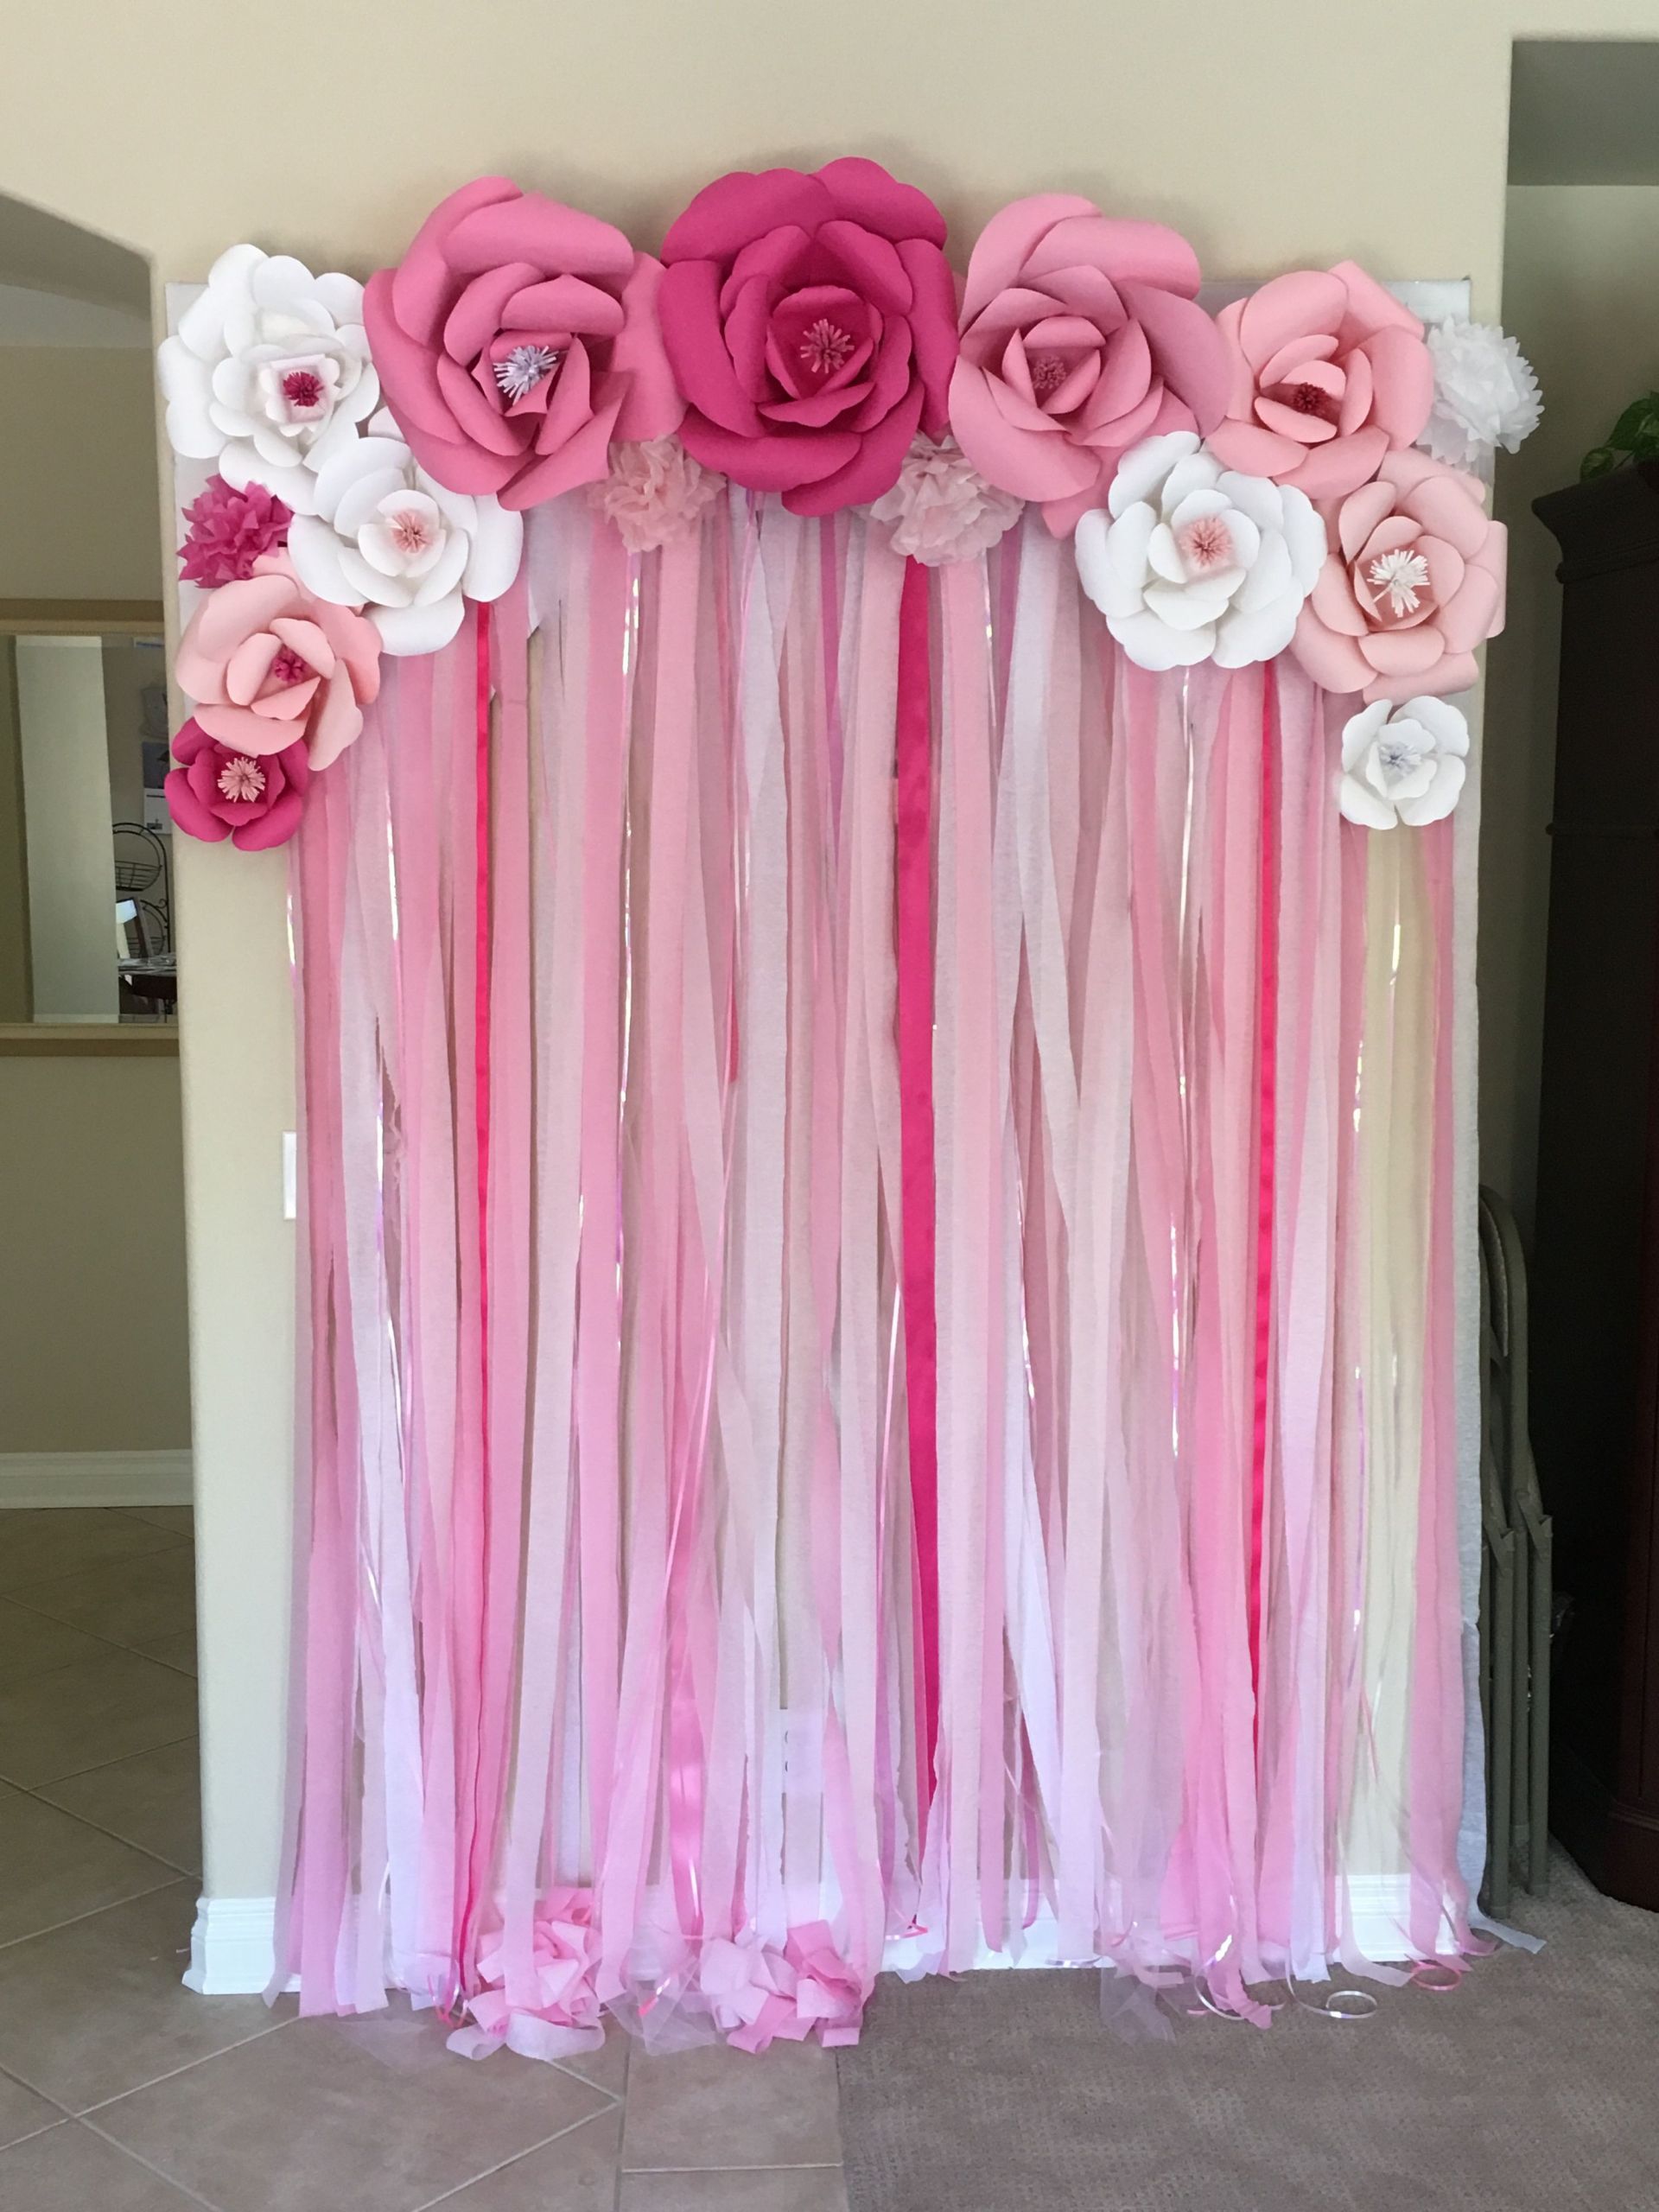 DIY Baby Shower Decoration Ideas For A Girl
 backdrop for a girl baby shower